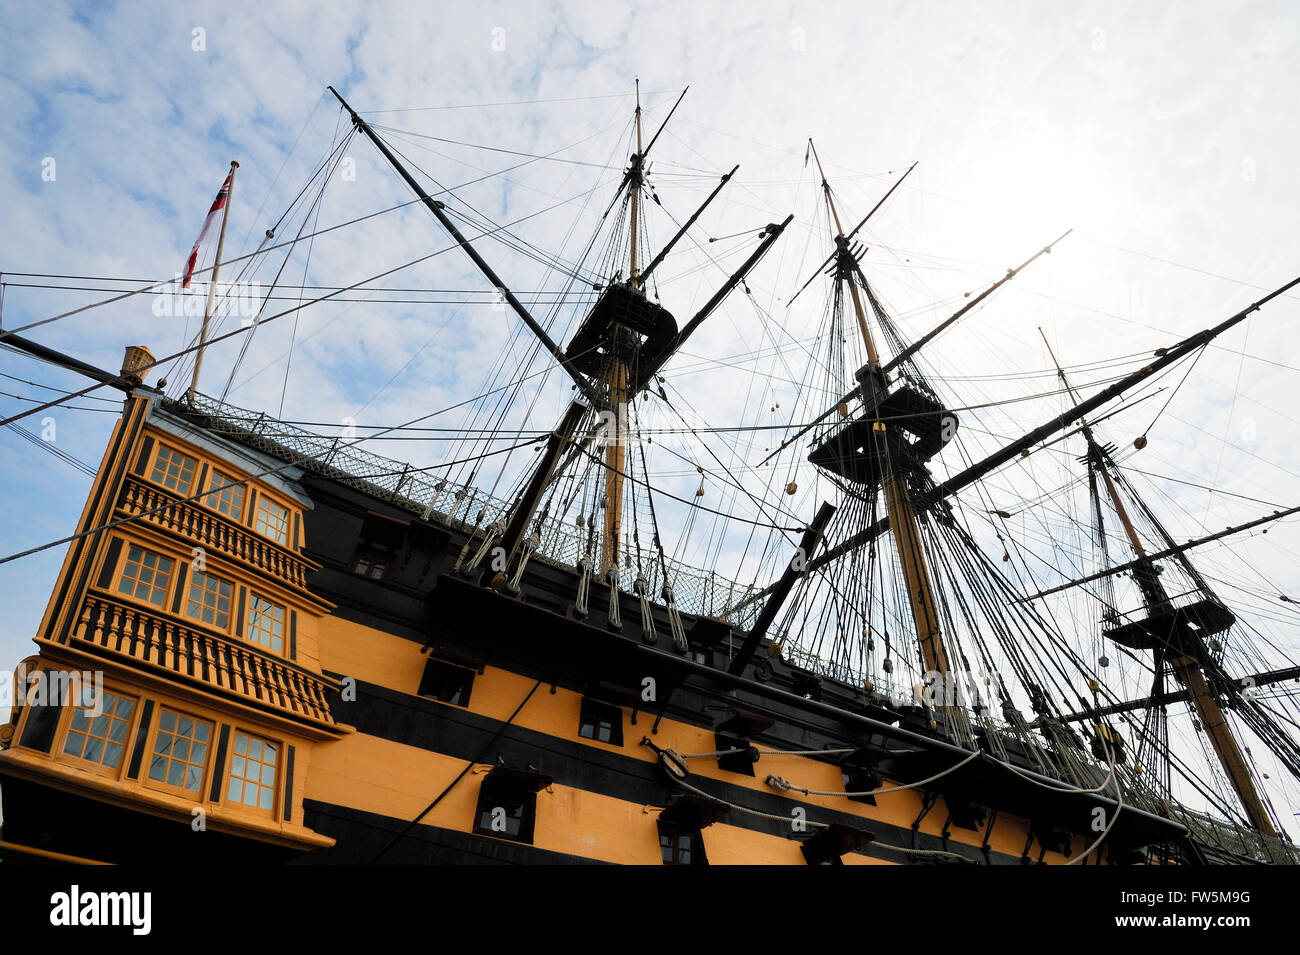 HMS Victory, in Portsmouth Historic Dockyard. The only surviving naval warship that represents the skill of naval dockyard shipwrights, ship designers and the industrial ability of Britain during the mid 18th century. She was Admiral Lord Nelson's flagship at the battle of Trafalgar, 21 October 1805, the most decisive British naval victory of the Napoleonic Wars (1803-1815). Twenty-seven British ships defeated thirty-three French and Spanish ships under French Admiral Pierre Villeneuve. The British victory spectacularly confirmed the naval supremacy that Britain had established during the past Stock Photo